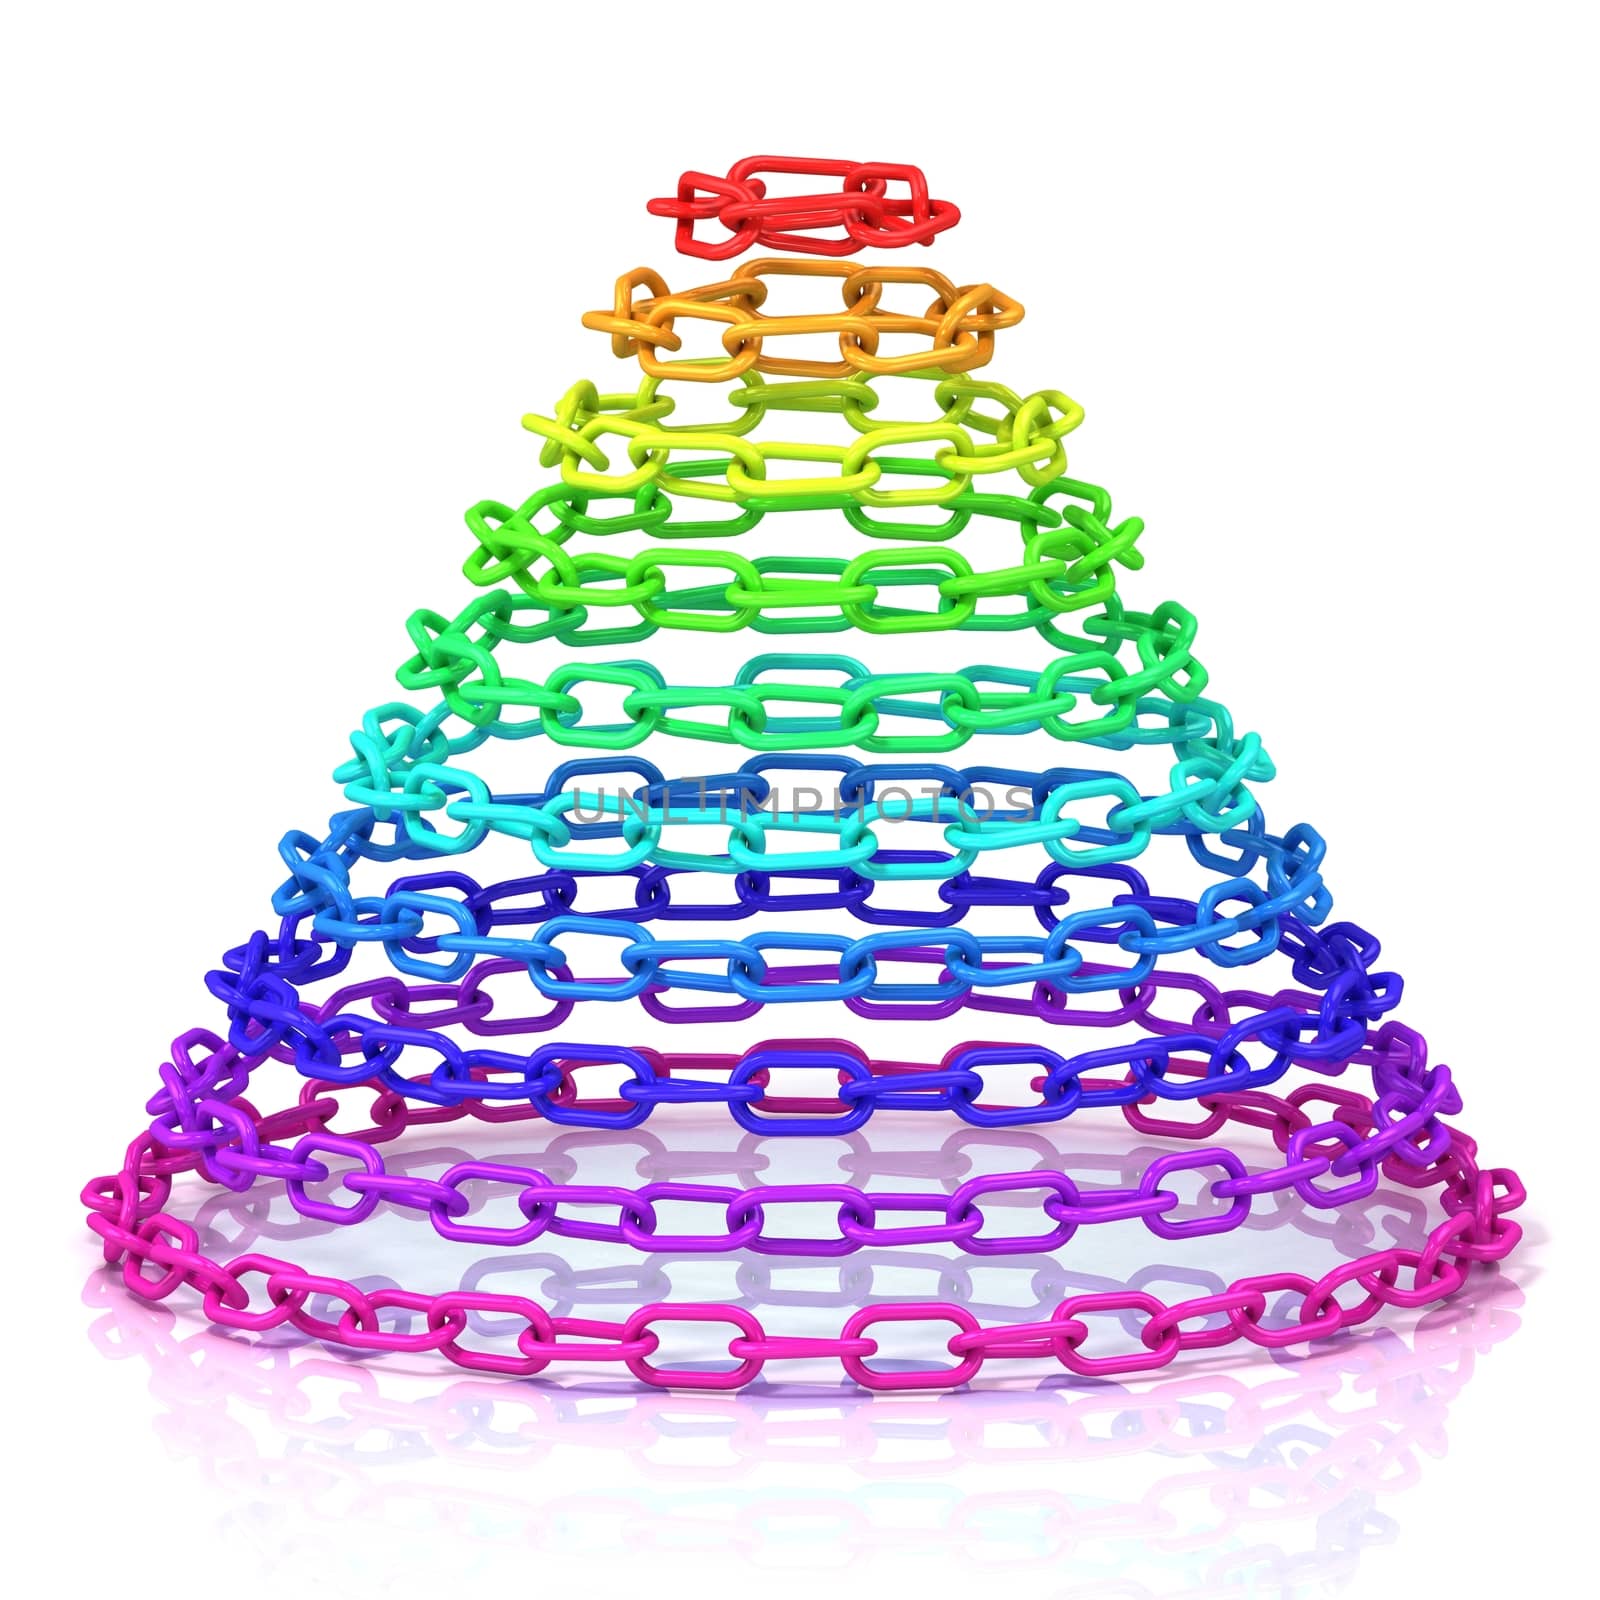 Colorful cone made of chain by djmilic